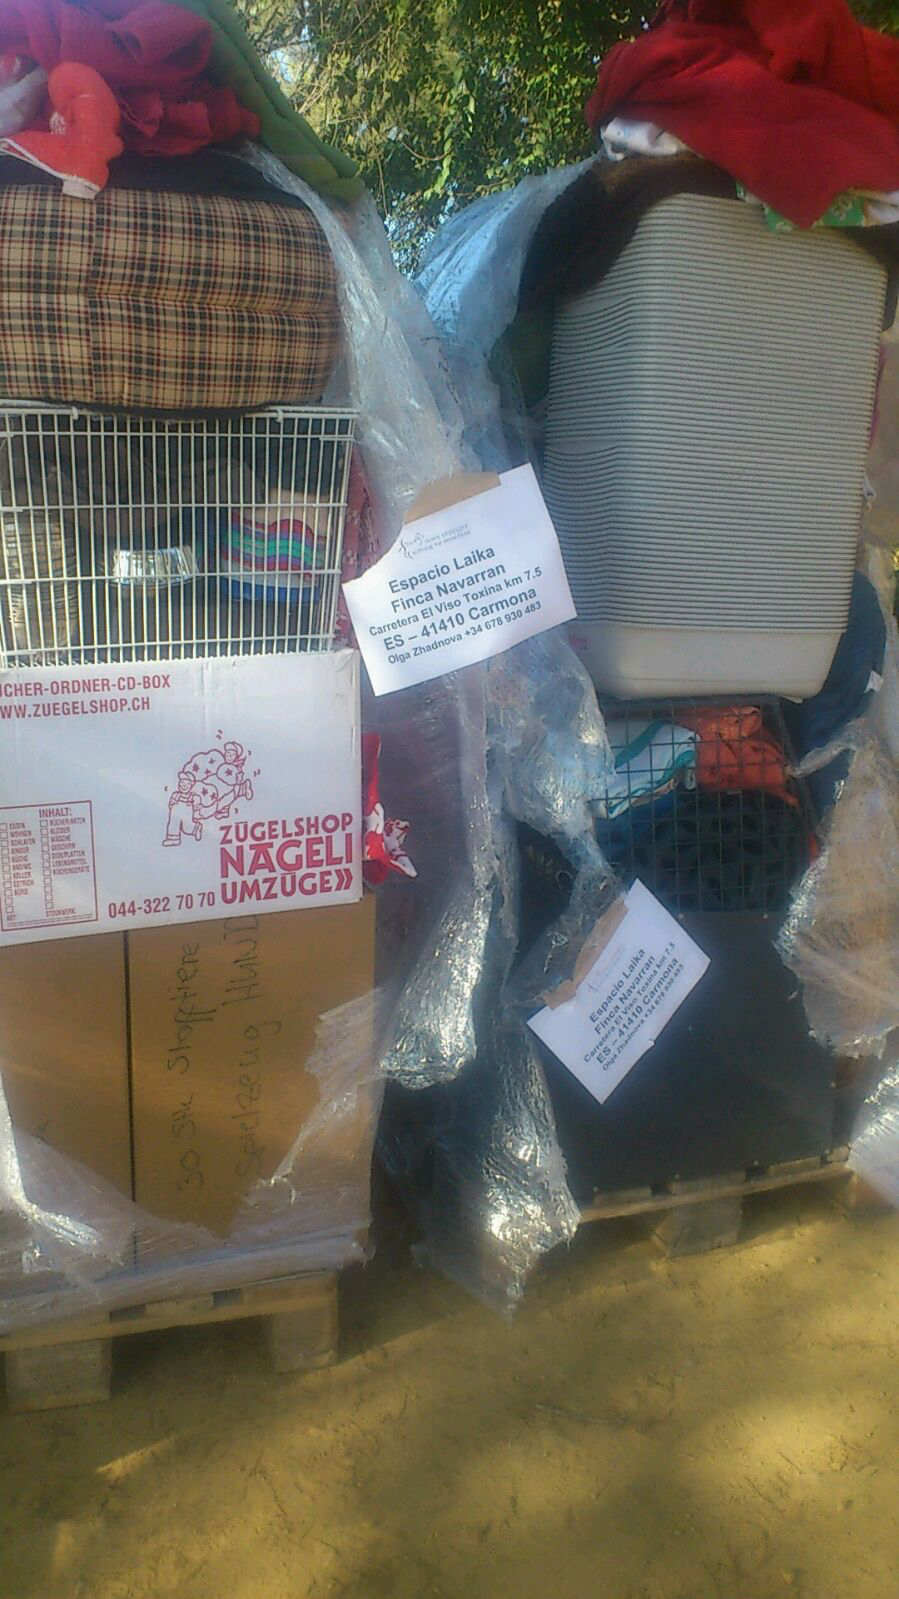 Your donations are well being received: Material delivery to Spain